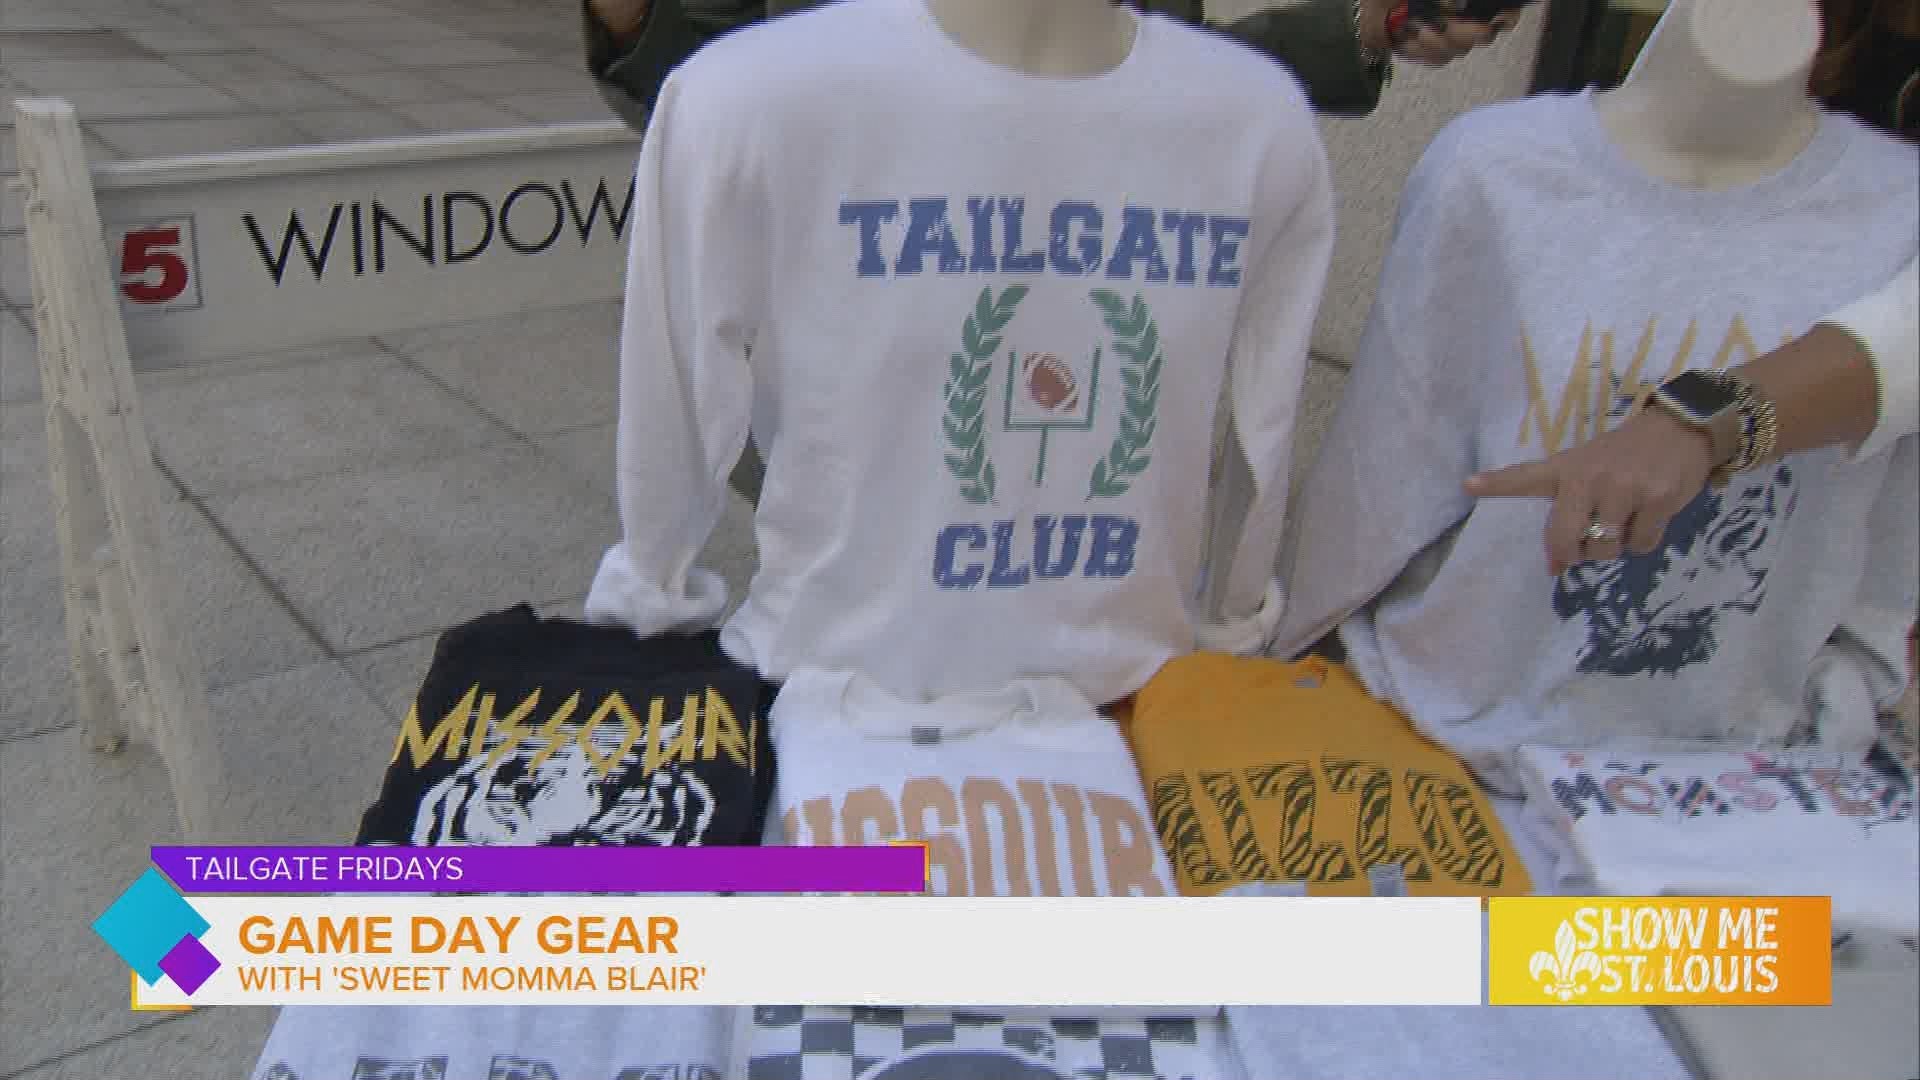 Tailgate Fridays continue on Show Me St. Louis. And this morning, Sweet Momma Blair stopped by with the cutest game day gear designs.